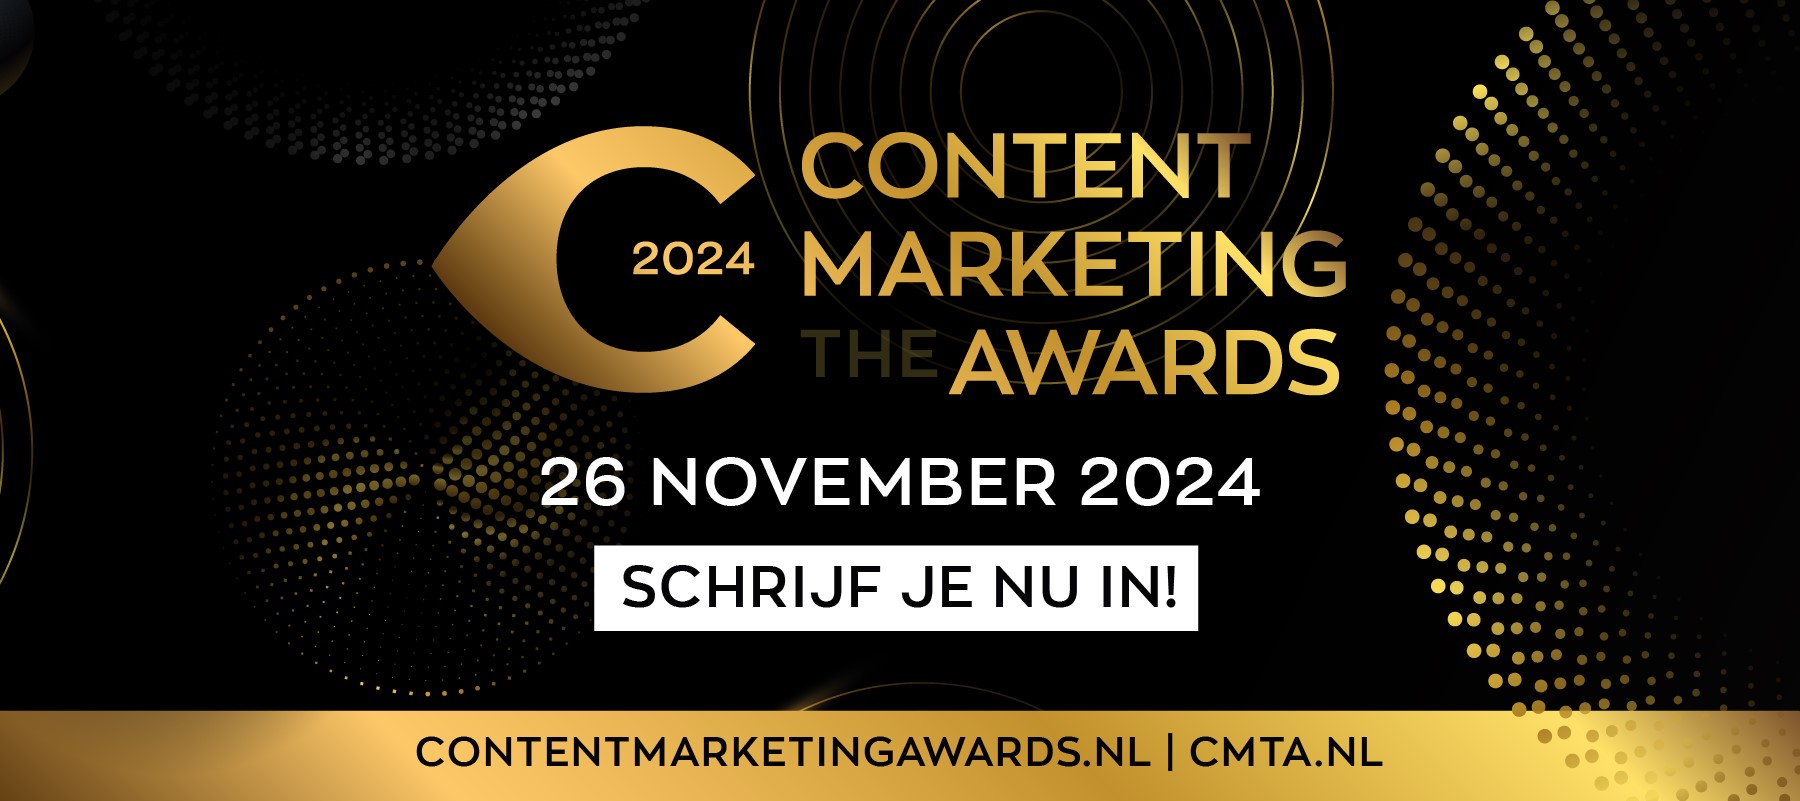 Opening inschrijving Content Marketing Awards 2024